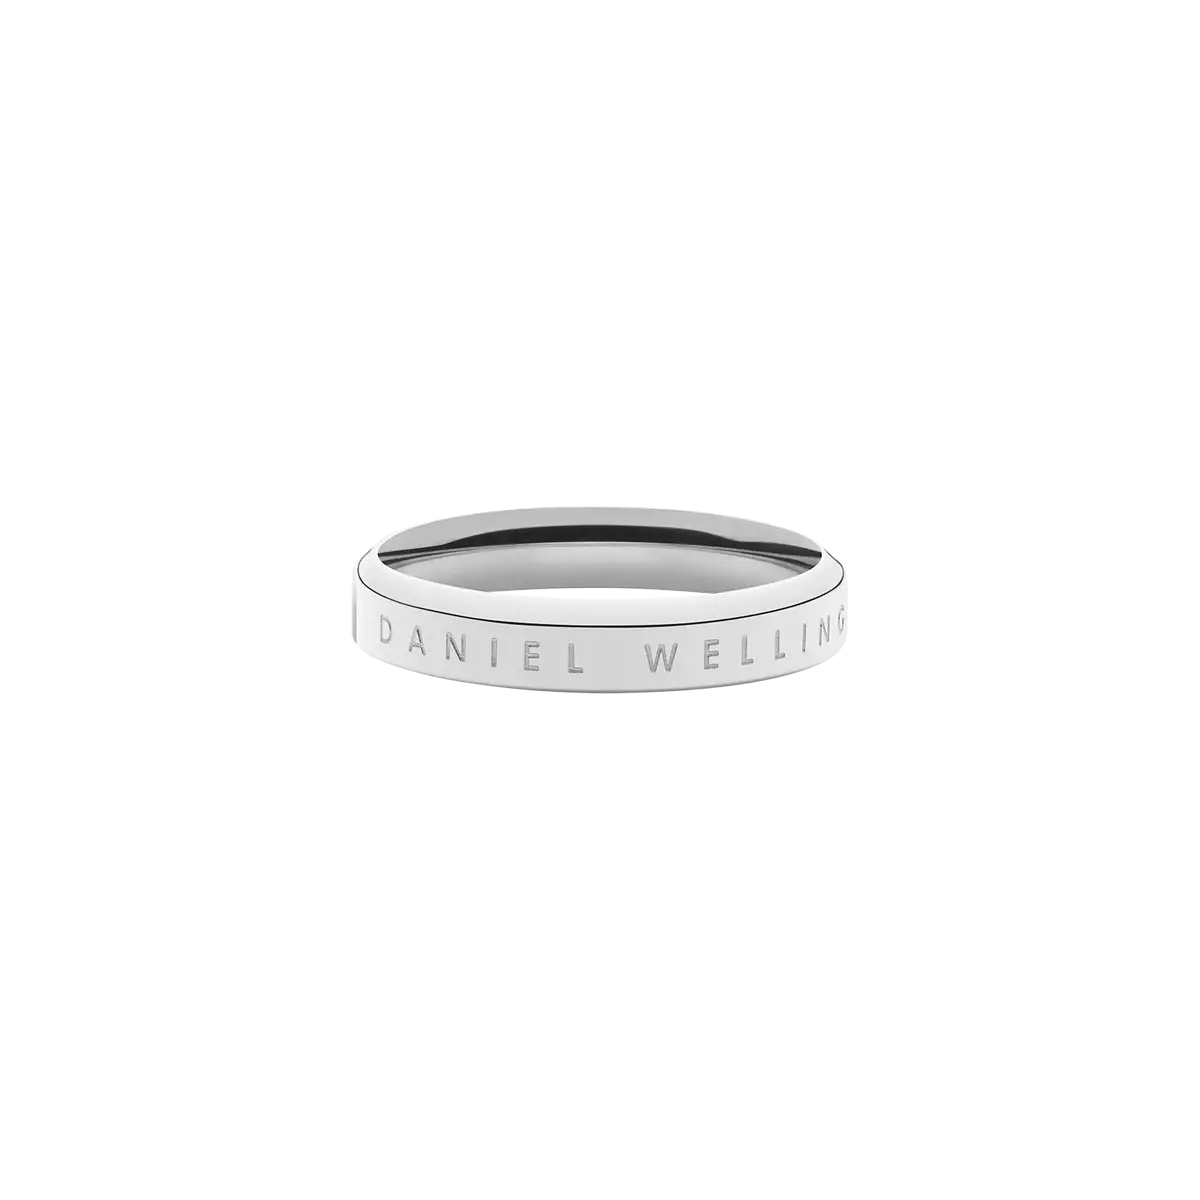 Classic Ring Silver